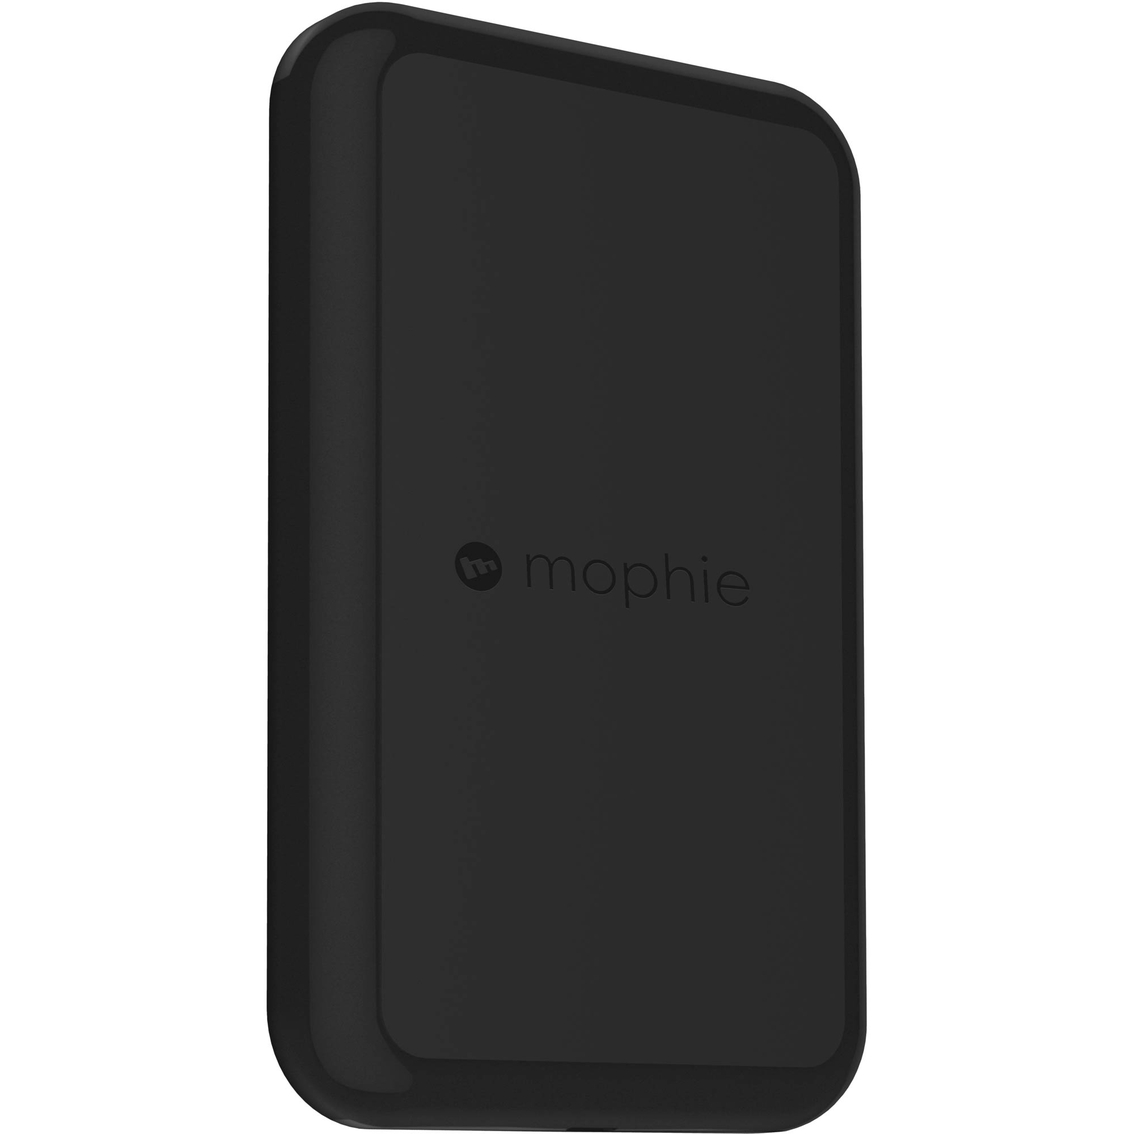 mophie Wireless Charging Base - Image 3 of 4